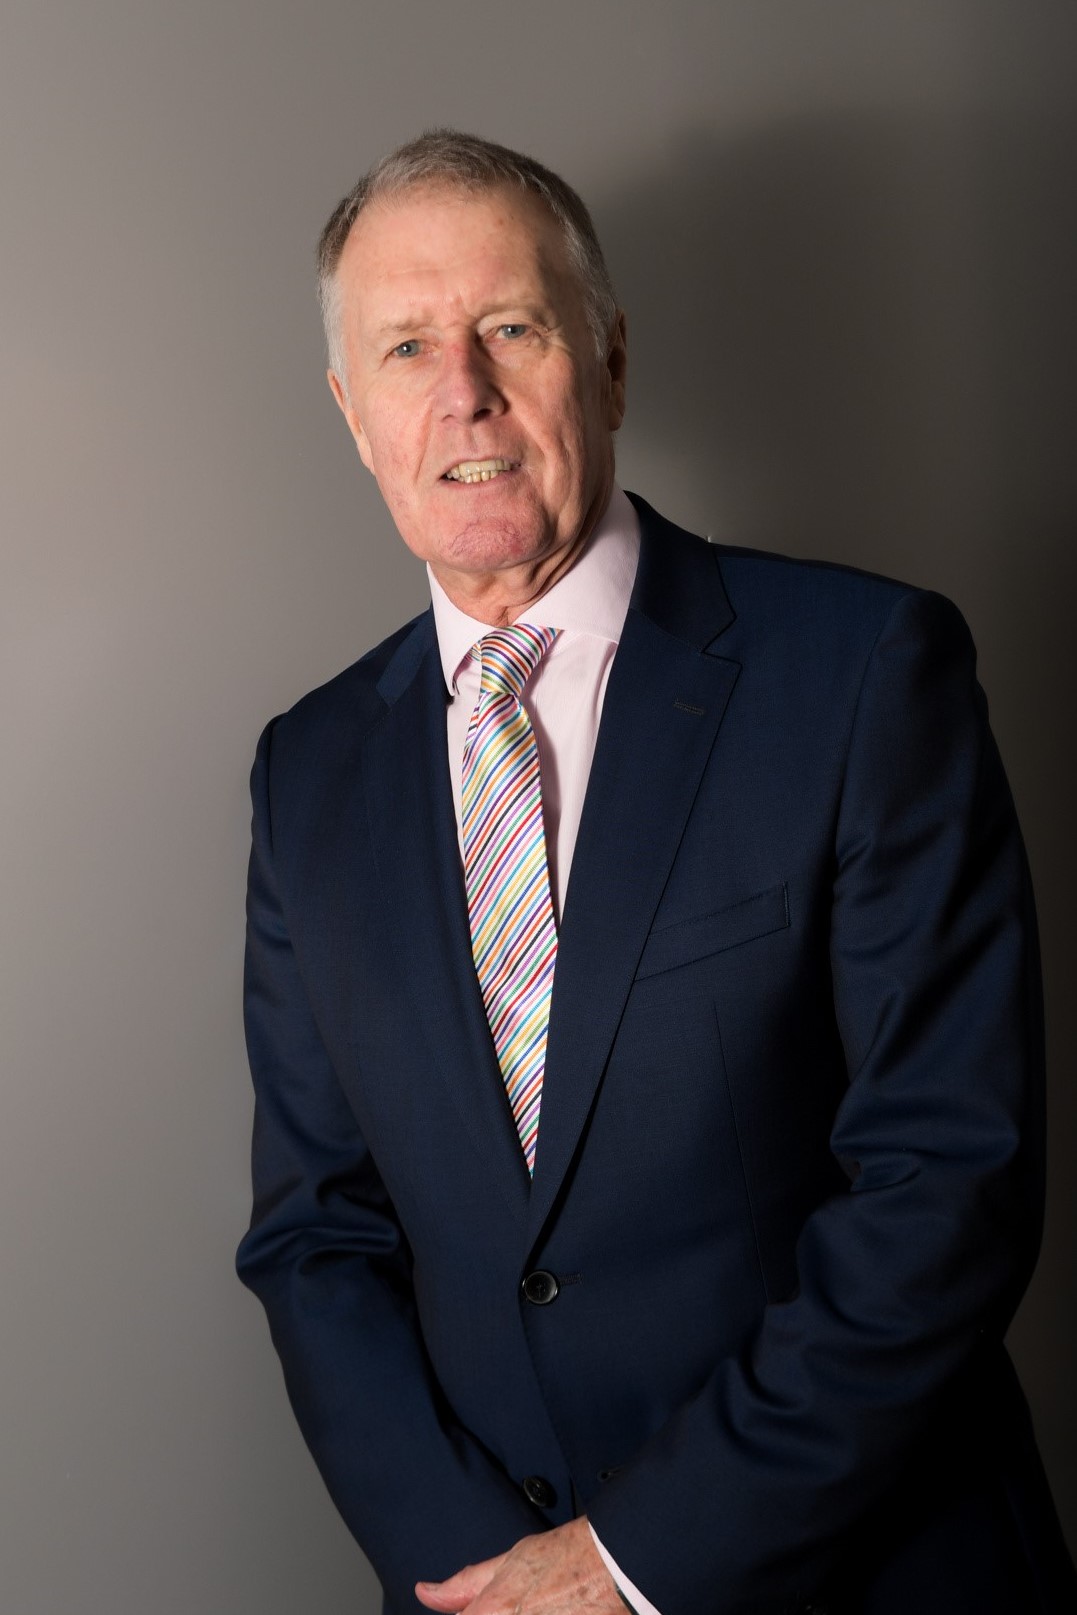 Sir Geoff Hurst to be special guest at The Wigley Group's golf fundraiser